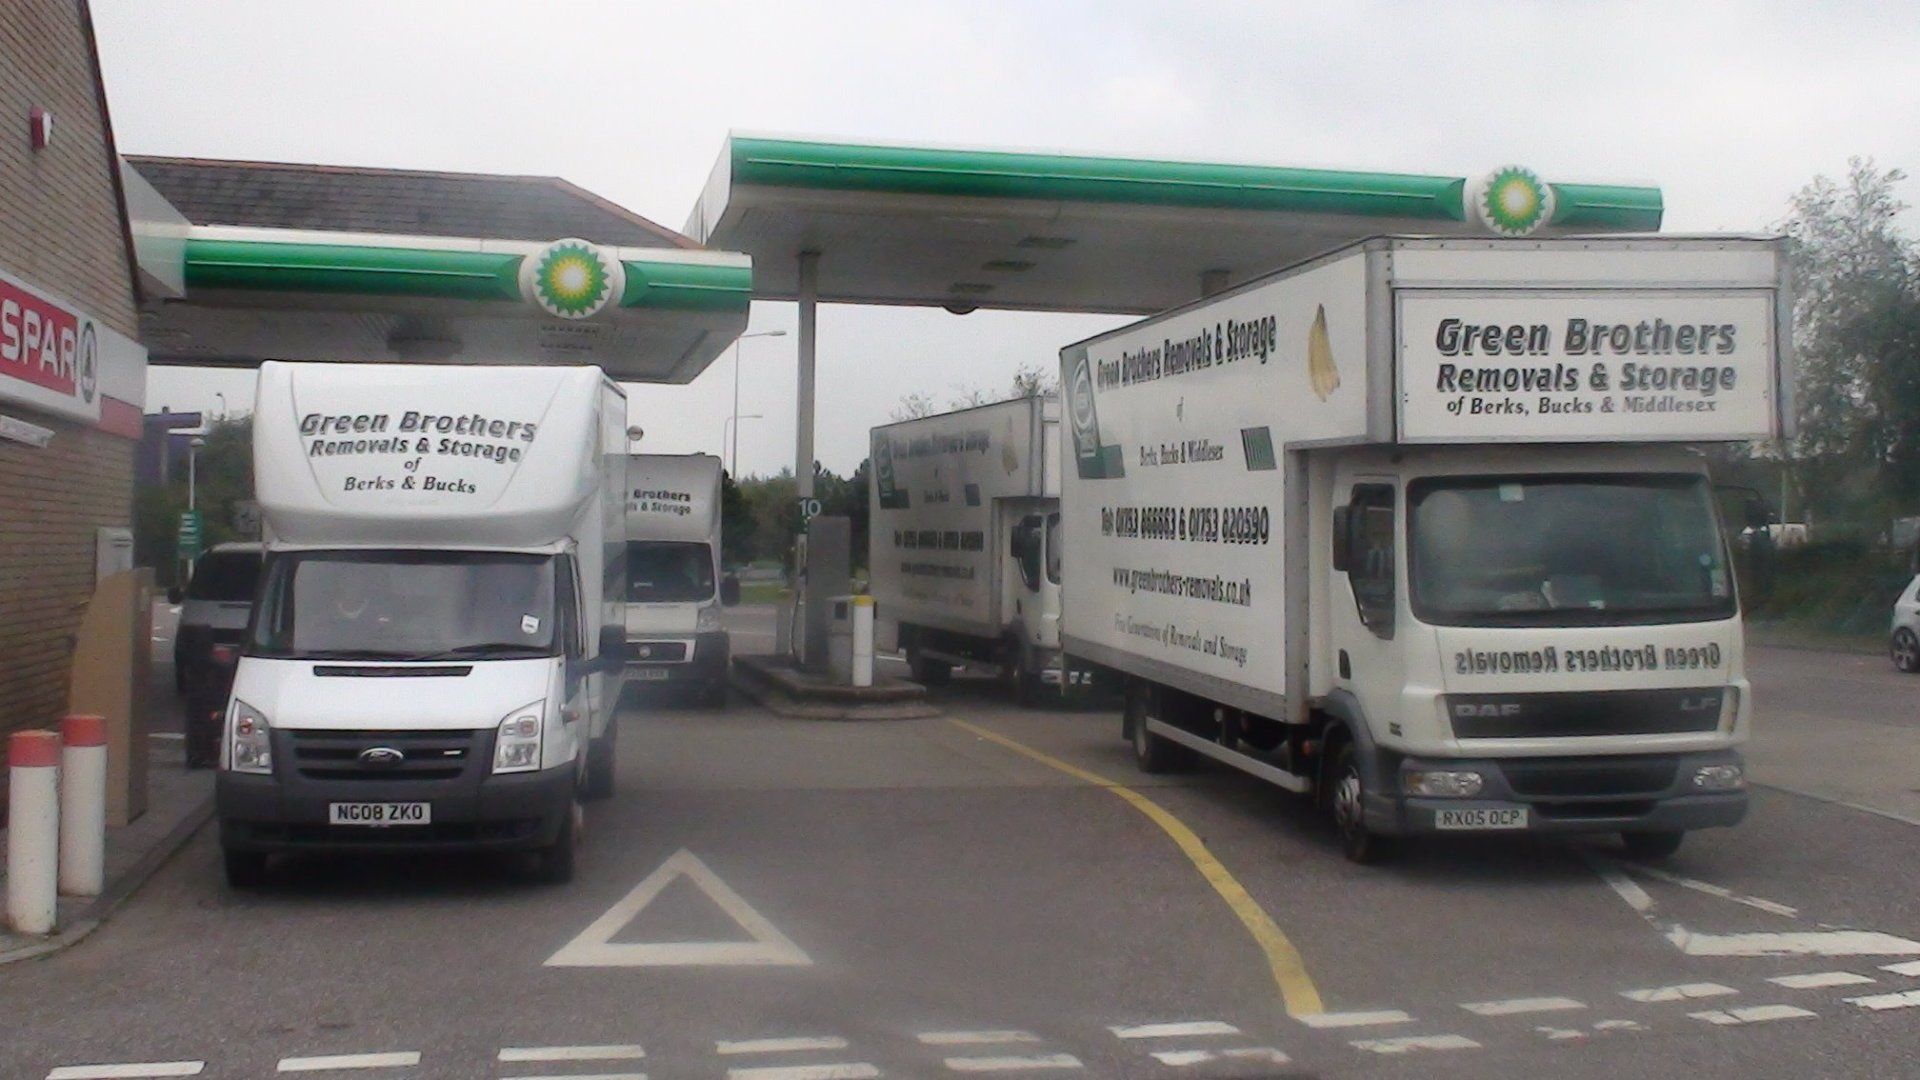 Slough - Green Bros Removals and Storage - trucks on the road